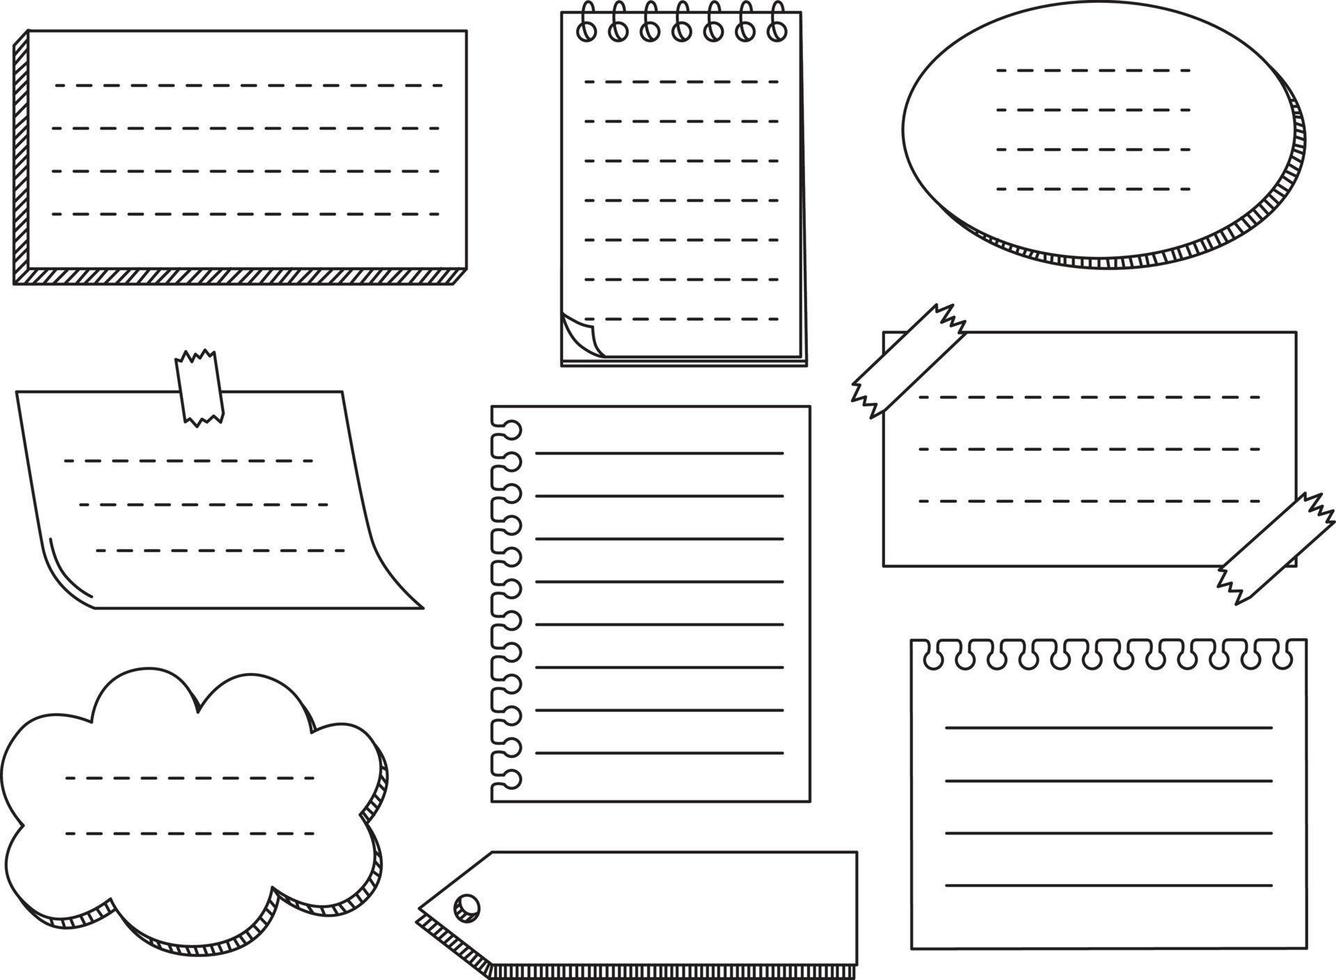 Memo paper sheets, sticky note, reminder, sticky tape and pins. Bullet journal elements. Vector illustration in white background.